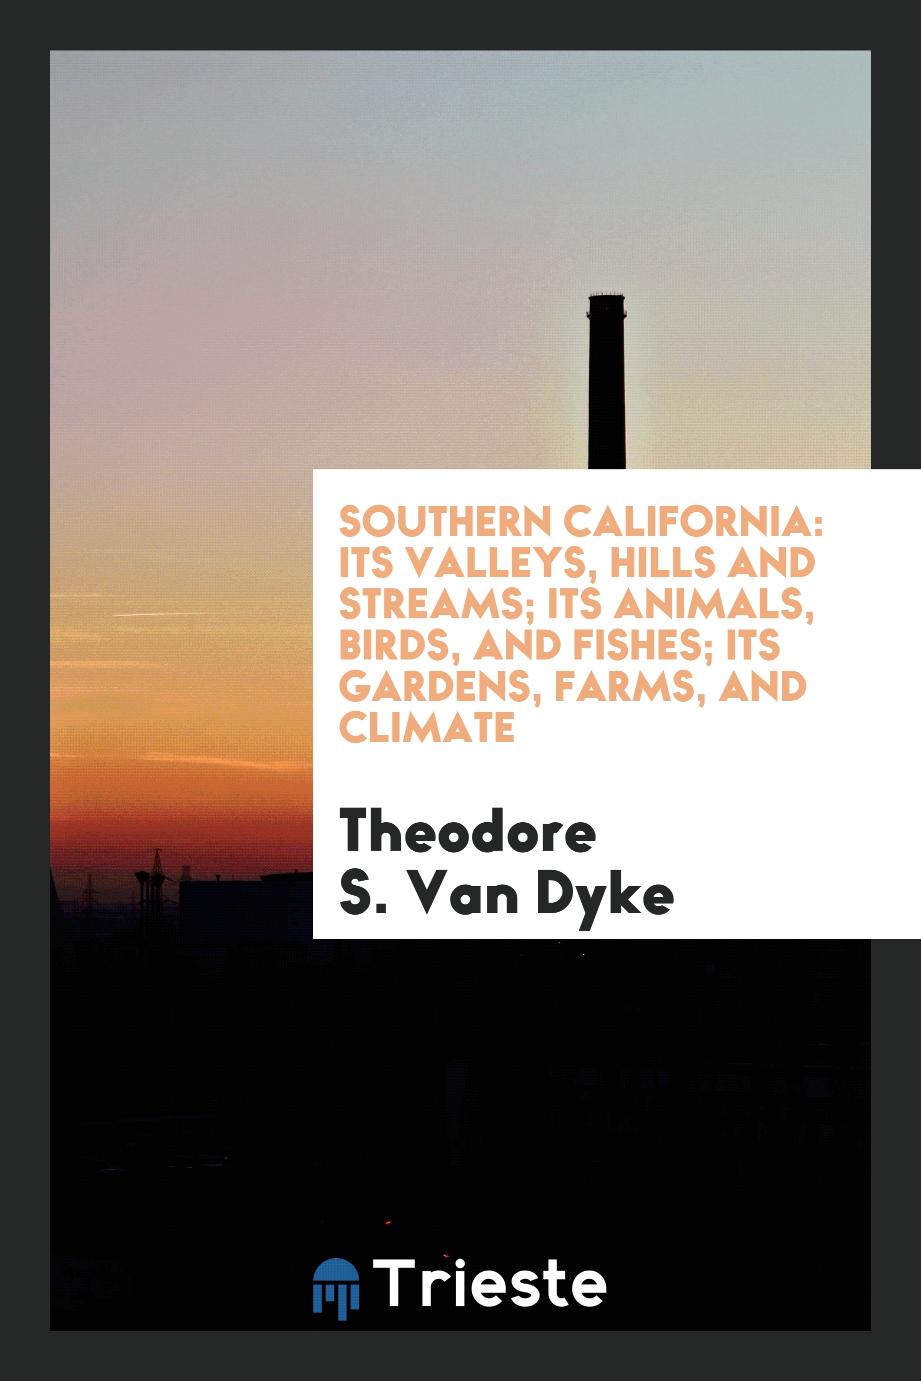 Southern California: Its Valleys, Hills and Streams; Its Animals, Birds, and Fishes; Its Gardens, Farms, and Climate